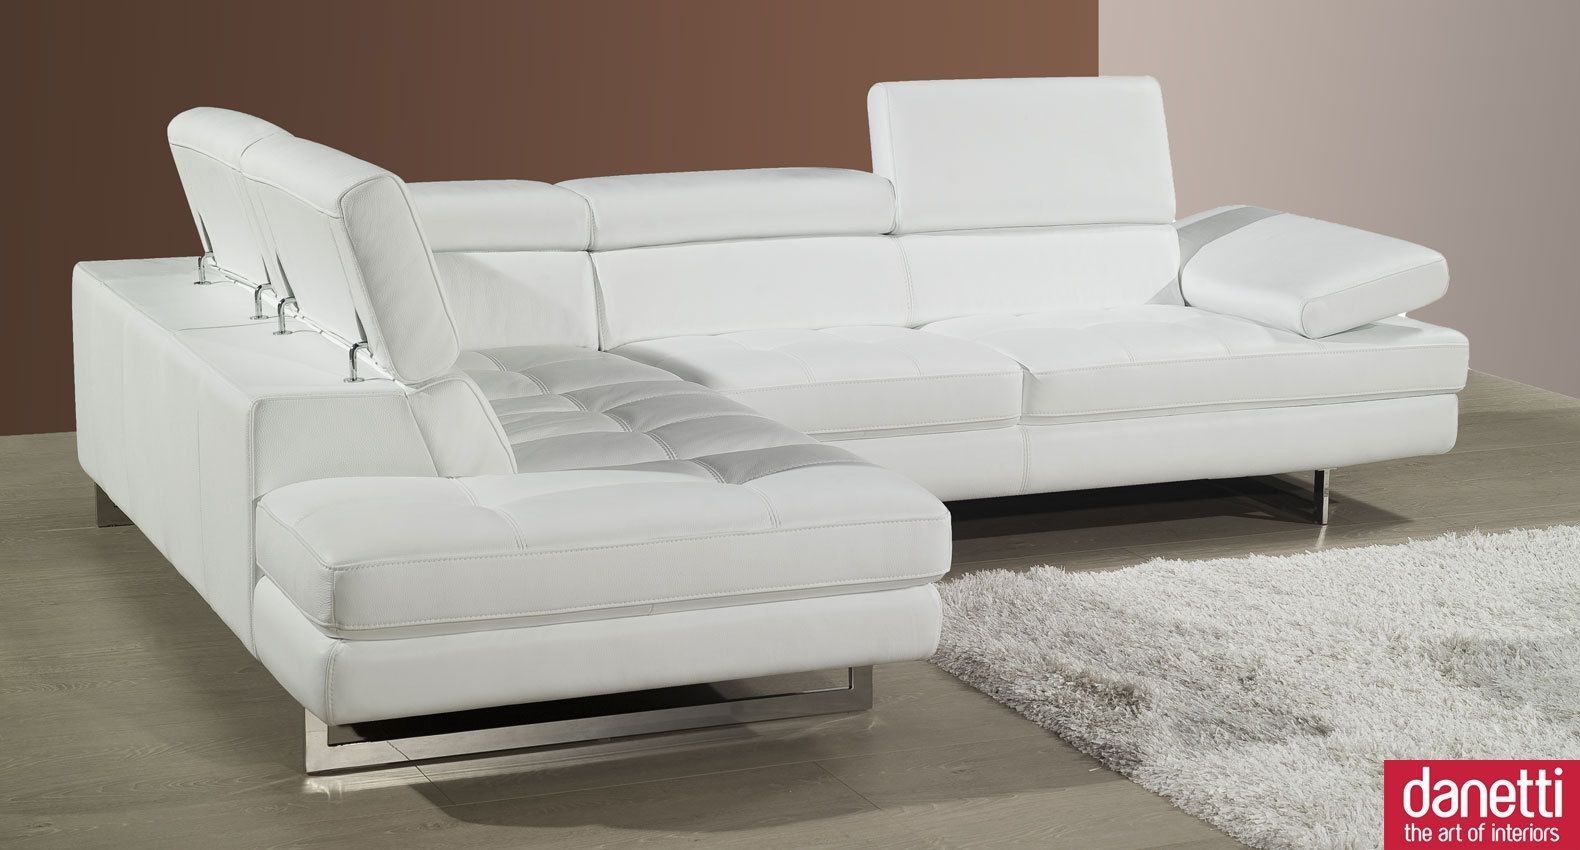 Modern White Leather Couchimage Gallery | Image Gallery | Idi Design In White Leather Corner Sofas (Photo 7 of 10)